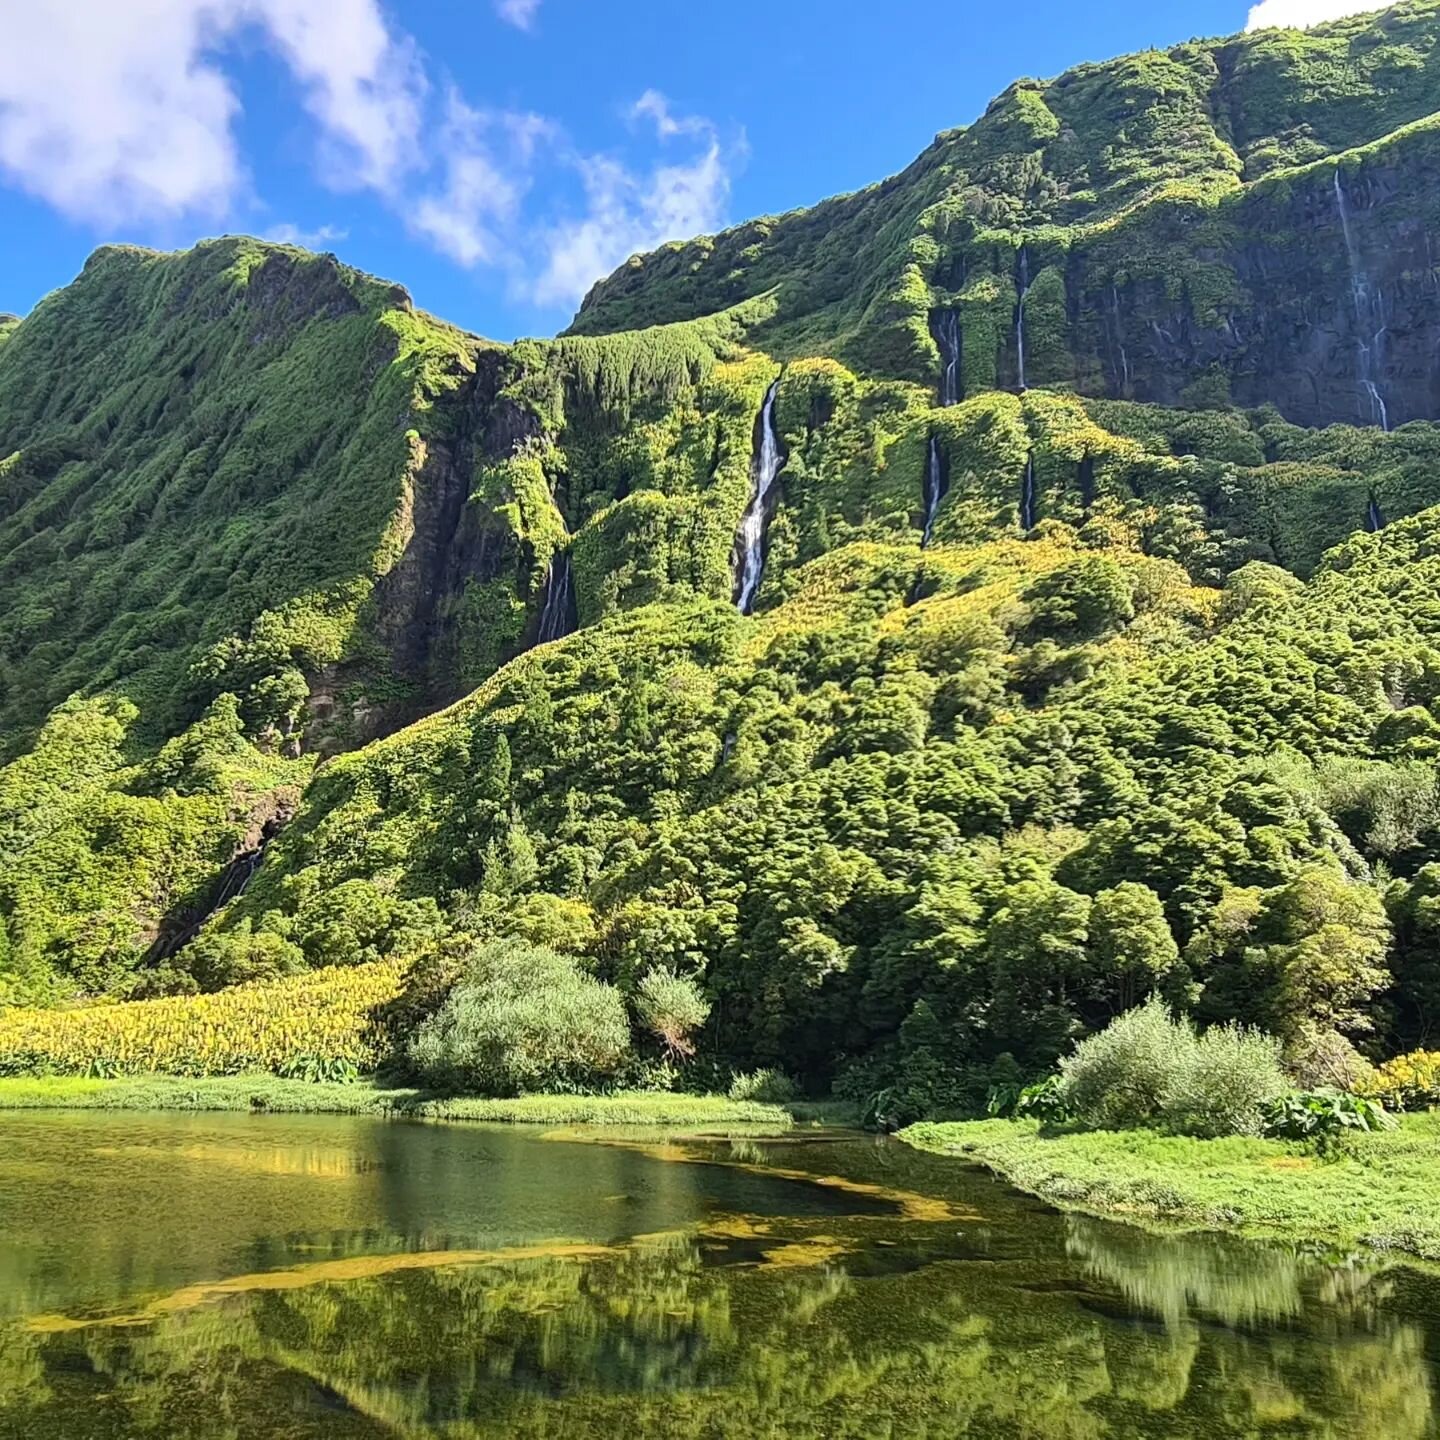 Flores Island, Azores - If your a lover of hiking and breathtaking nature, this is the place for you! 

#natureseekers #hikingtrails #waterfalls #natureview #viewpoint #flores #craterlake #freshair #breathofthewild #breathe